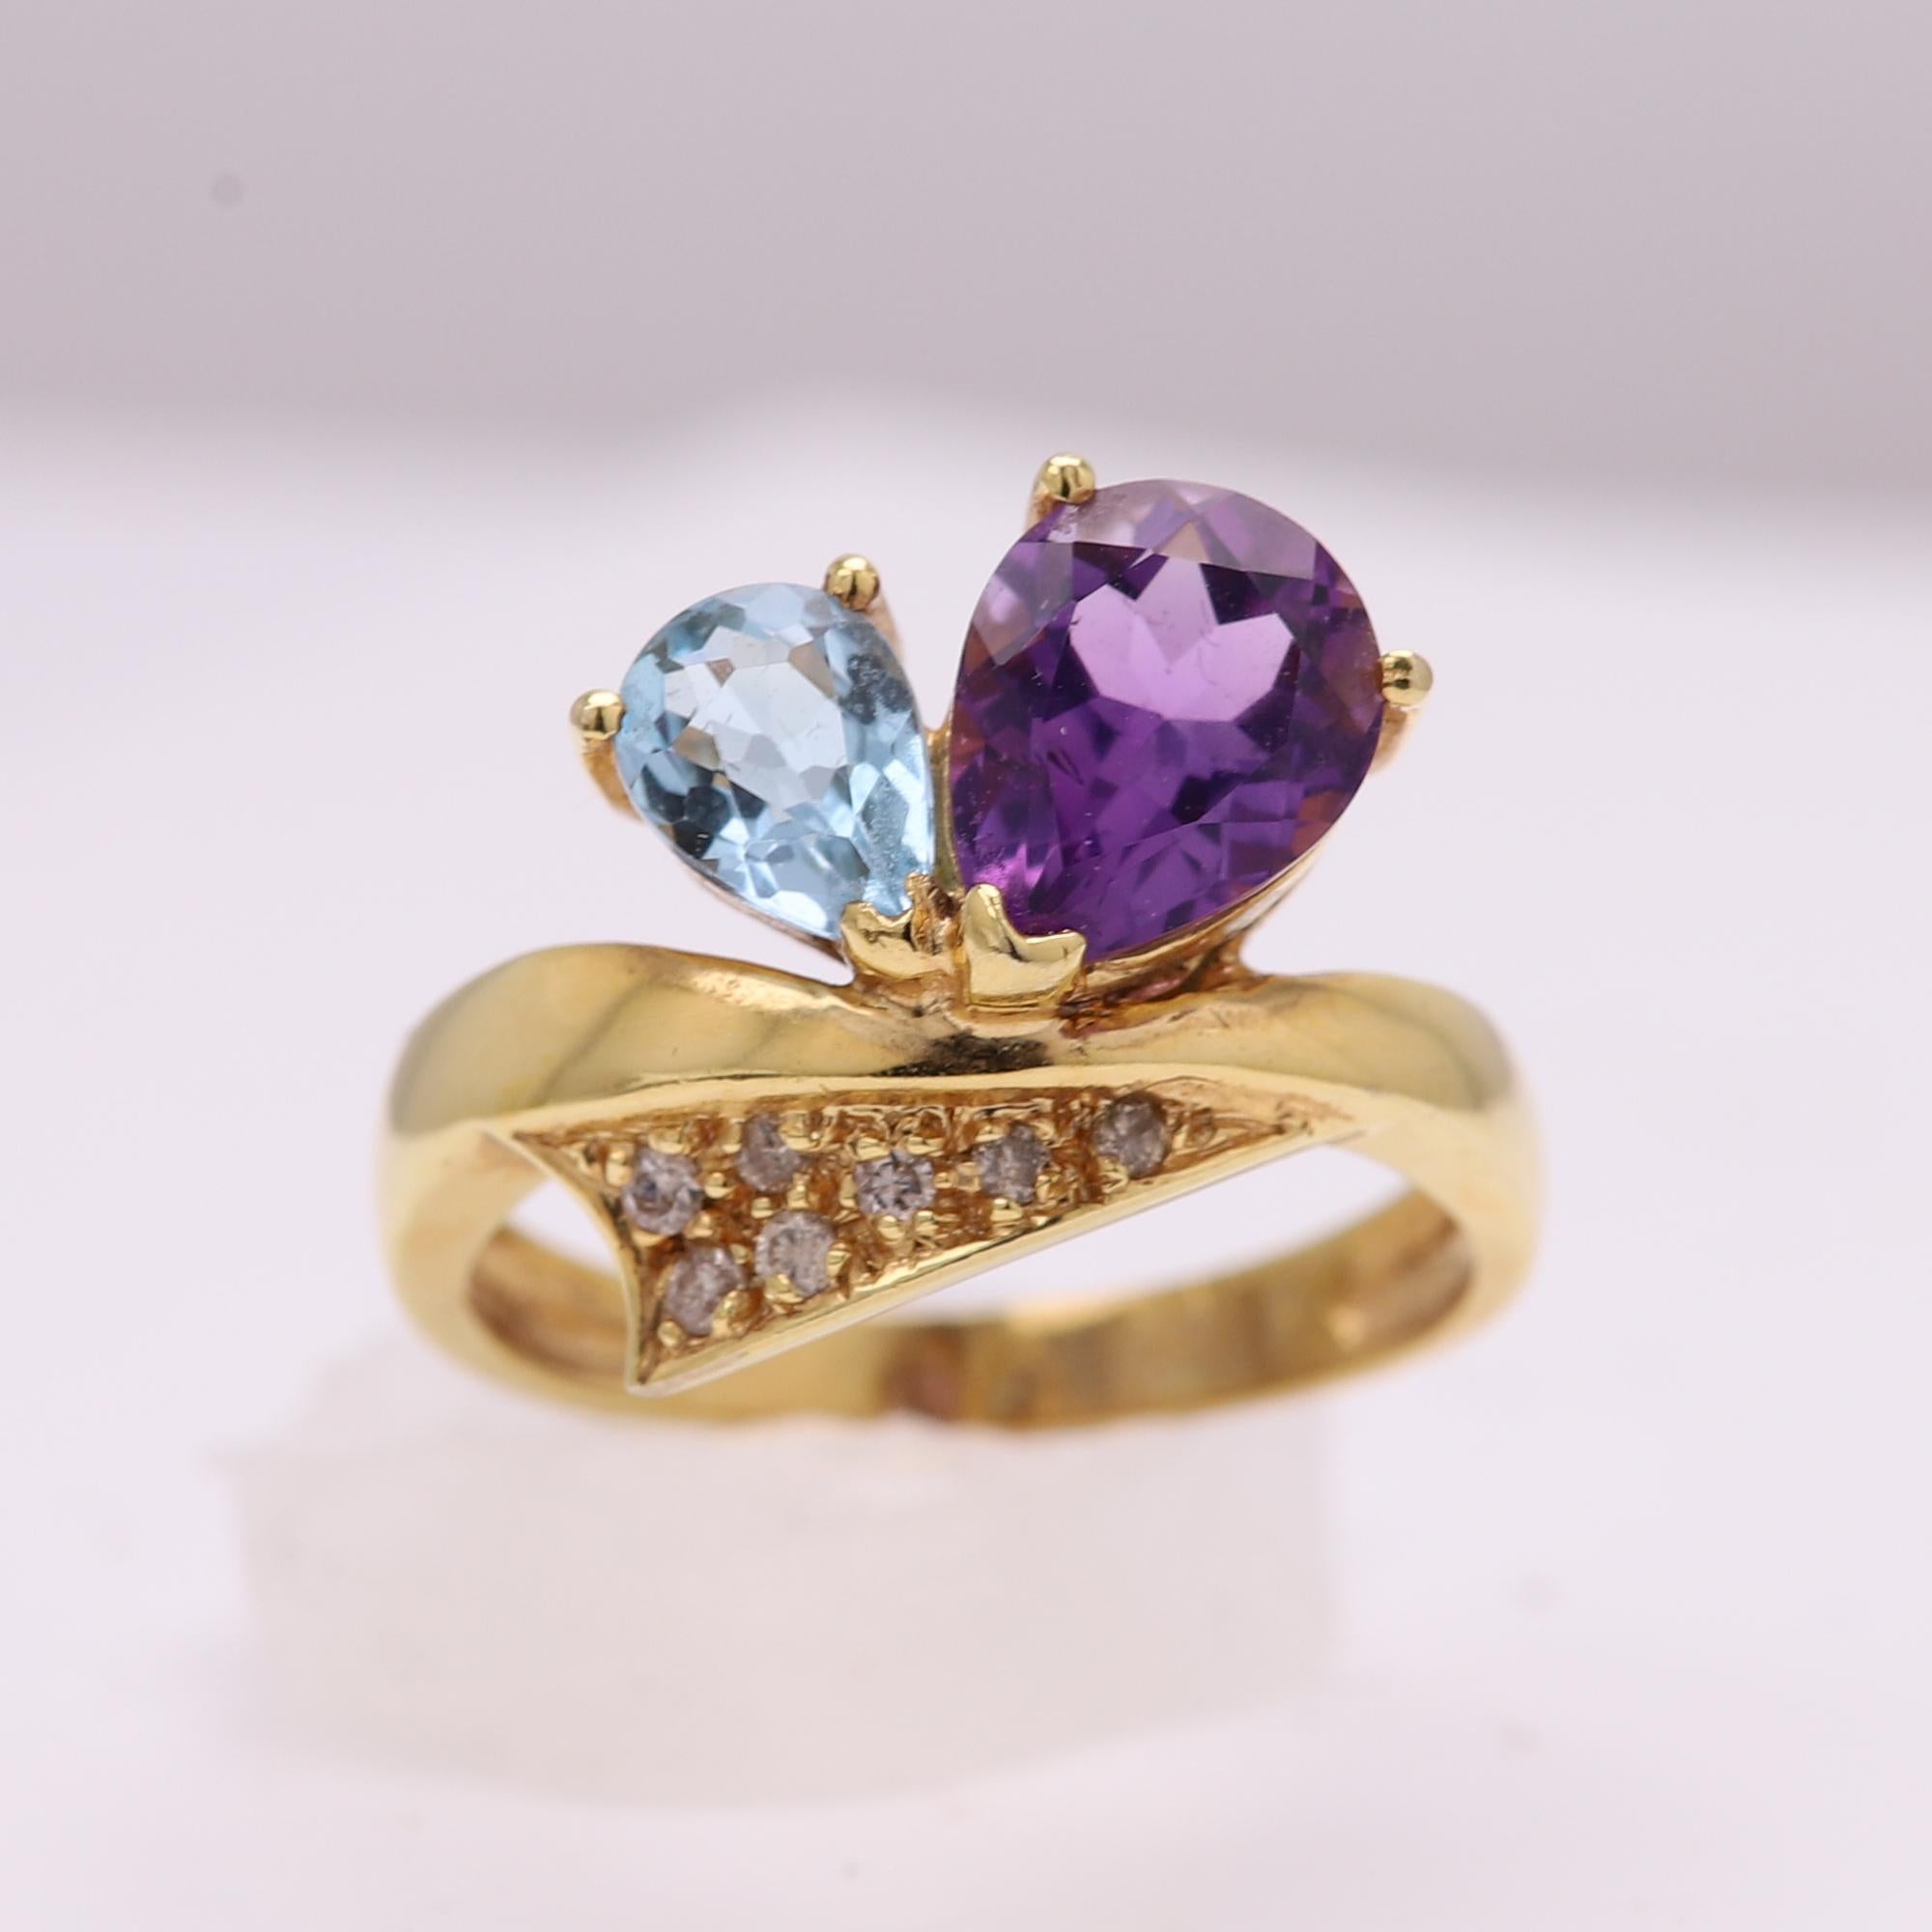 Circa 1950 a vintage cluster pear shape gemstone ring.
Brilliant colors of natural amethyst and blue topaz plus some diamonds.
Pear shape Amethyst size 9x7mm, Blue Topaz 7x5mm.
14k Yellow Gold 3.80 grams
Pre-owned in excellent condition.
Gift Box